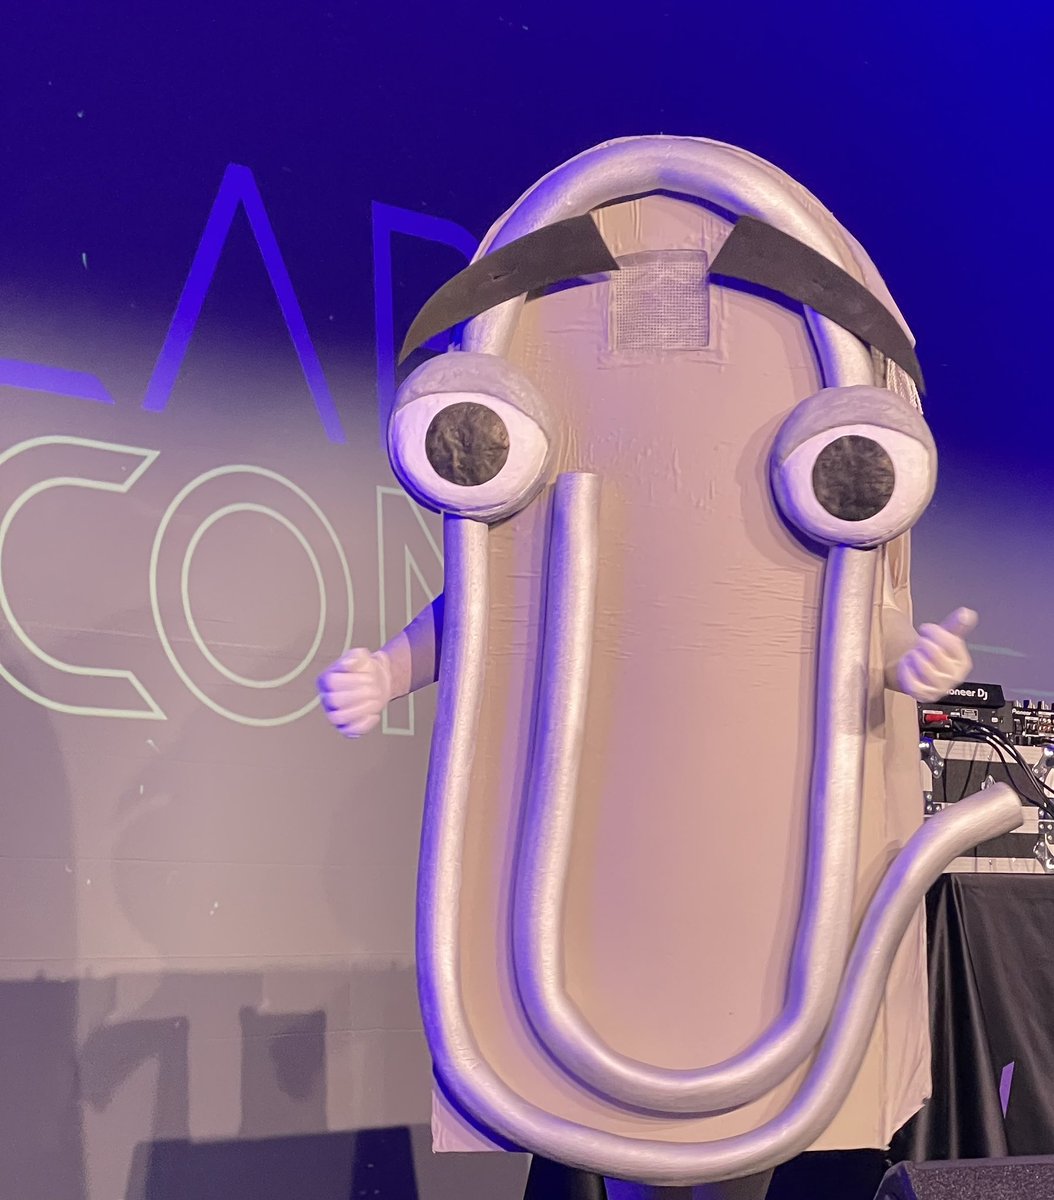 Huge thanks to @labscon_io what a fantastic conference! Big clippy salute to all the organizers 🫡